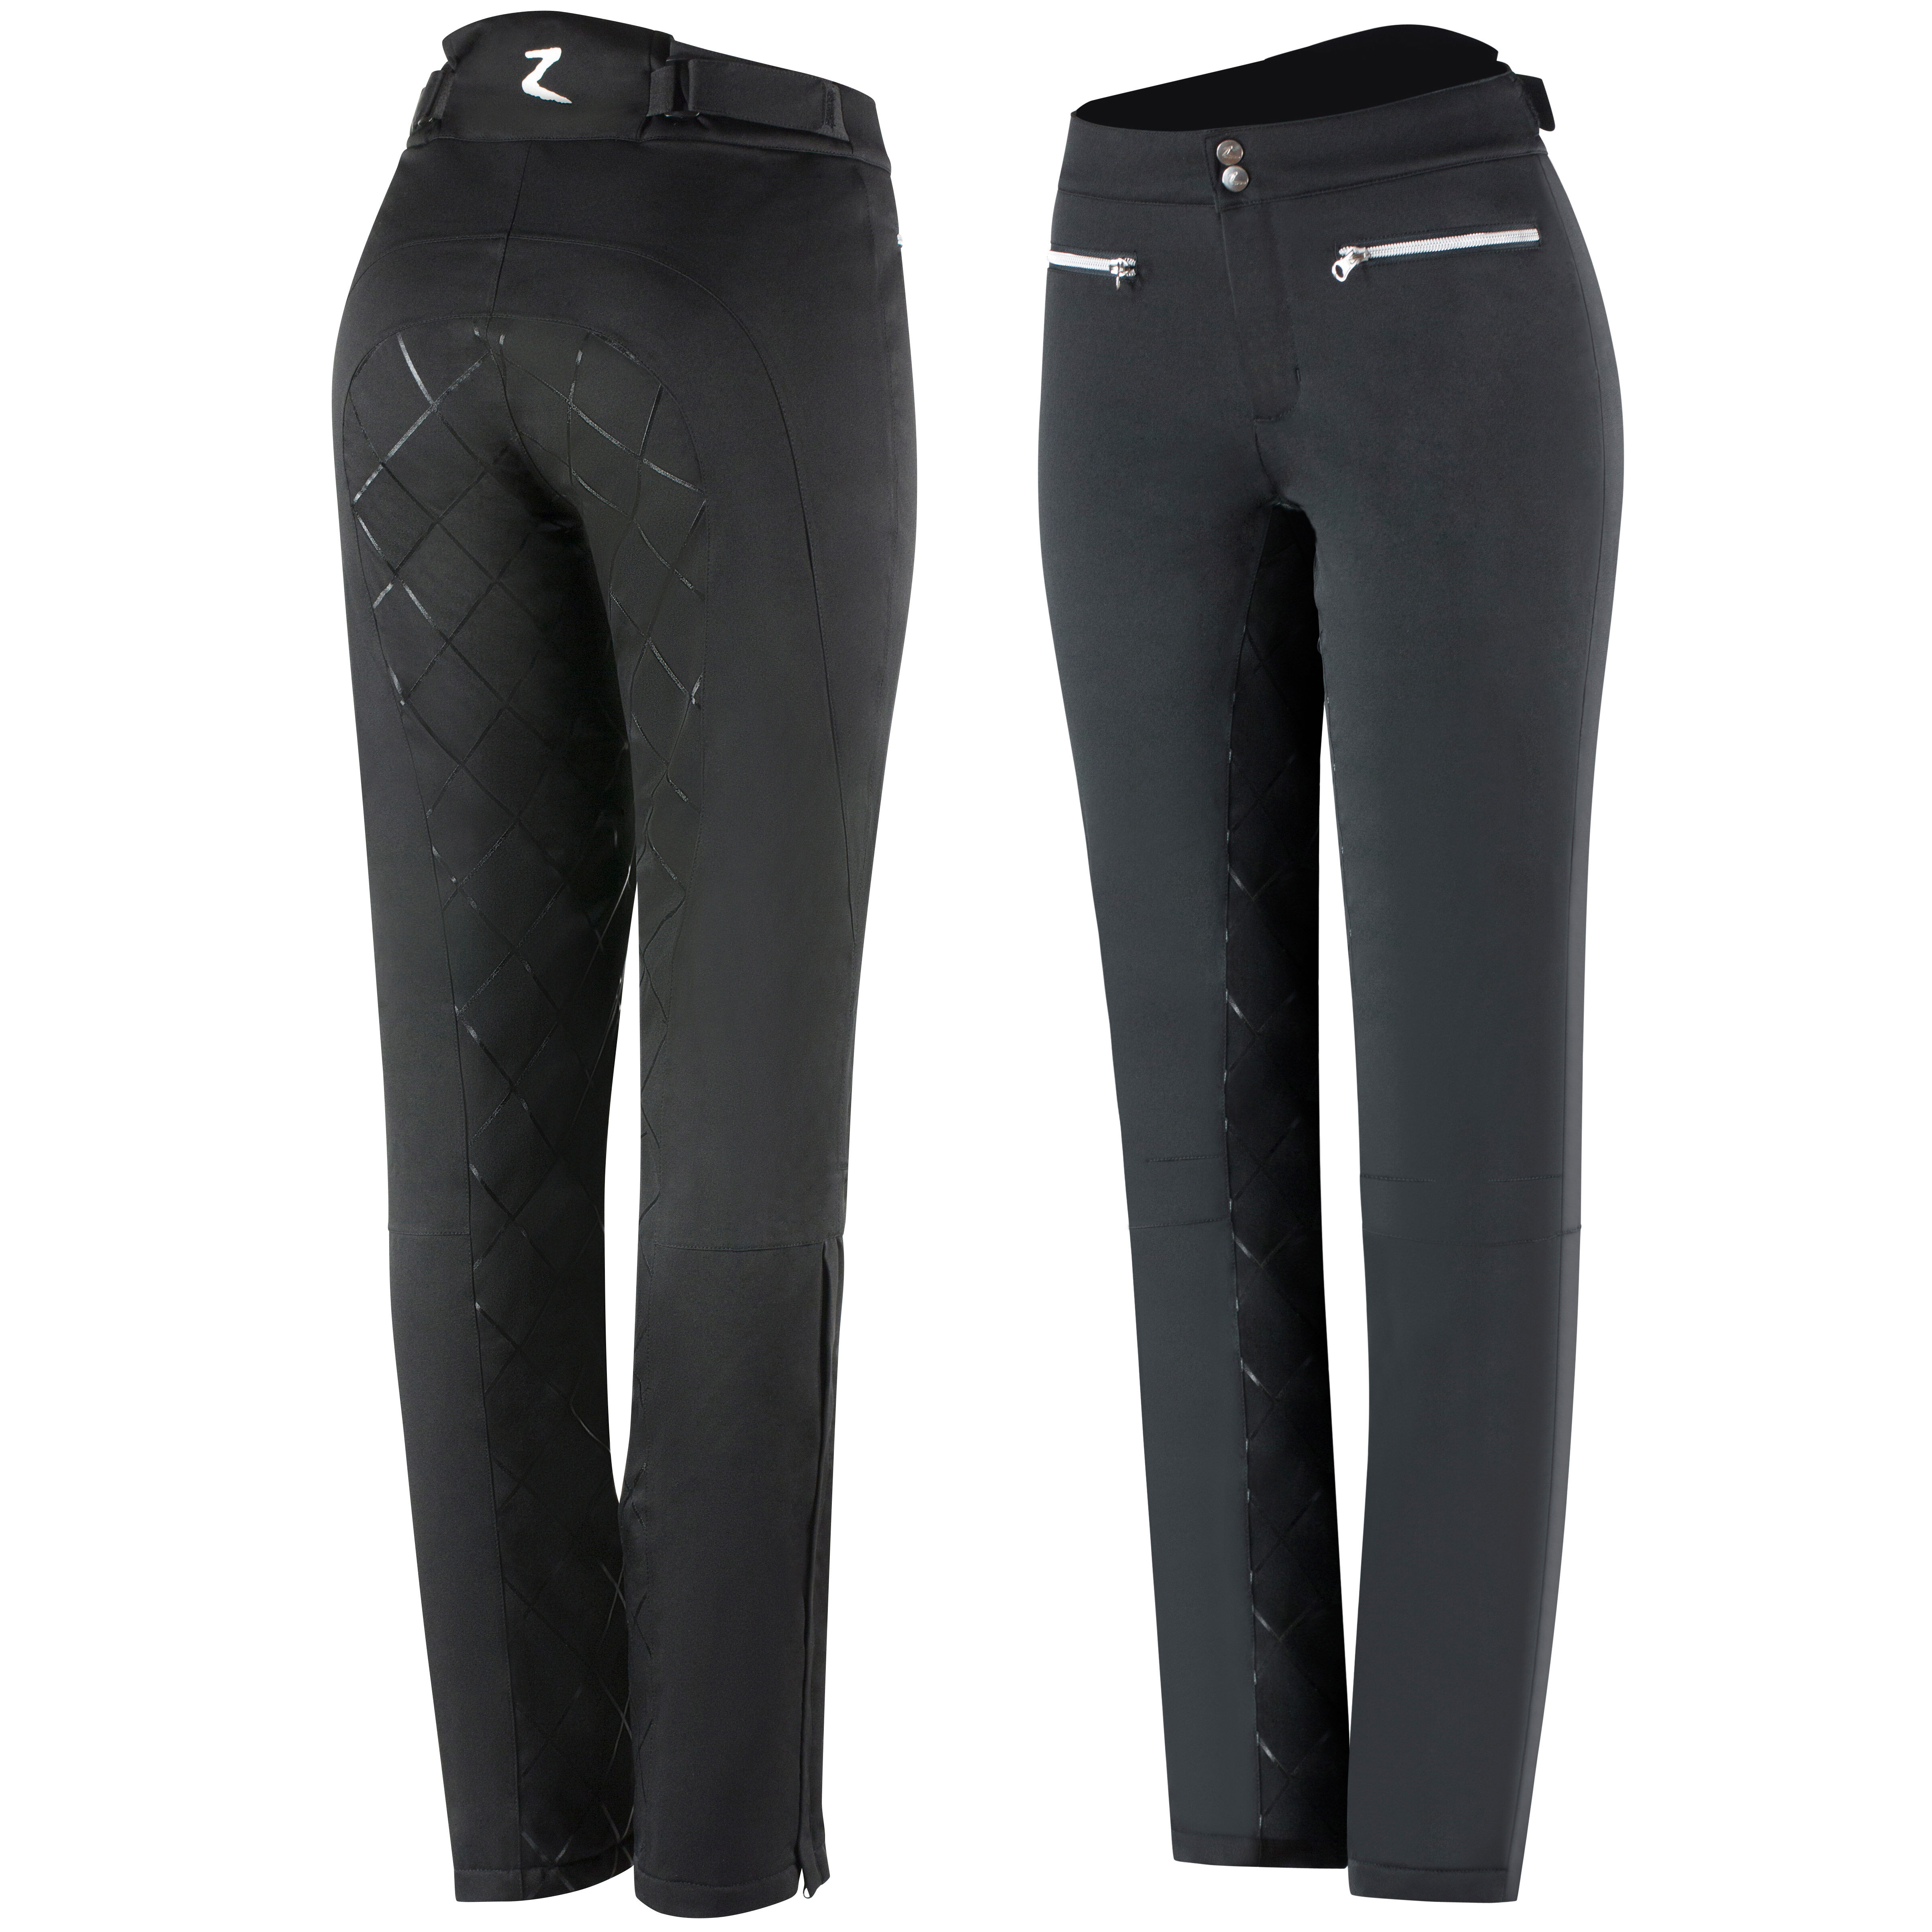 Premier Equine Lumen Reflective Unisex Riding Trousers  Robyns Tack Room   Robyns Tack Room